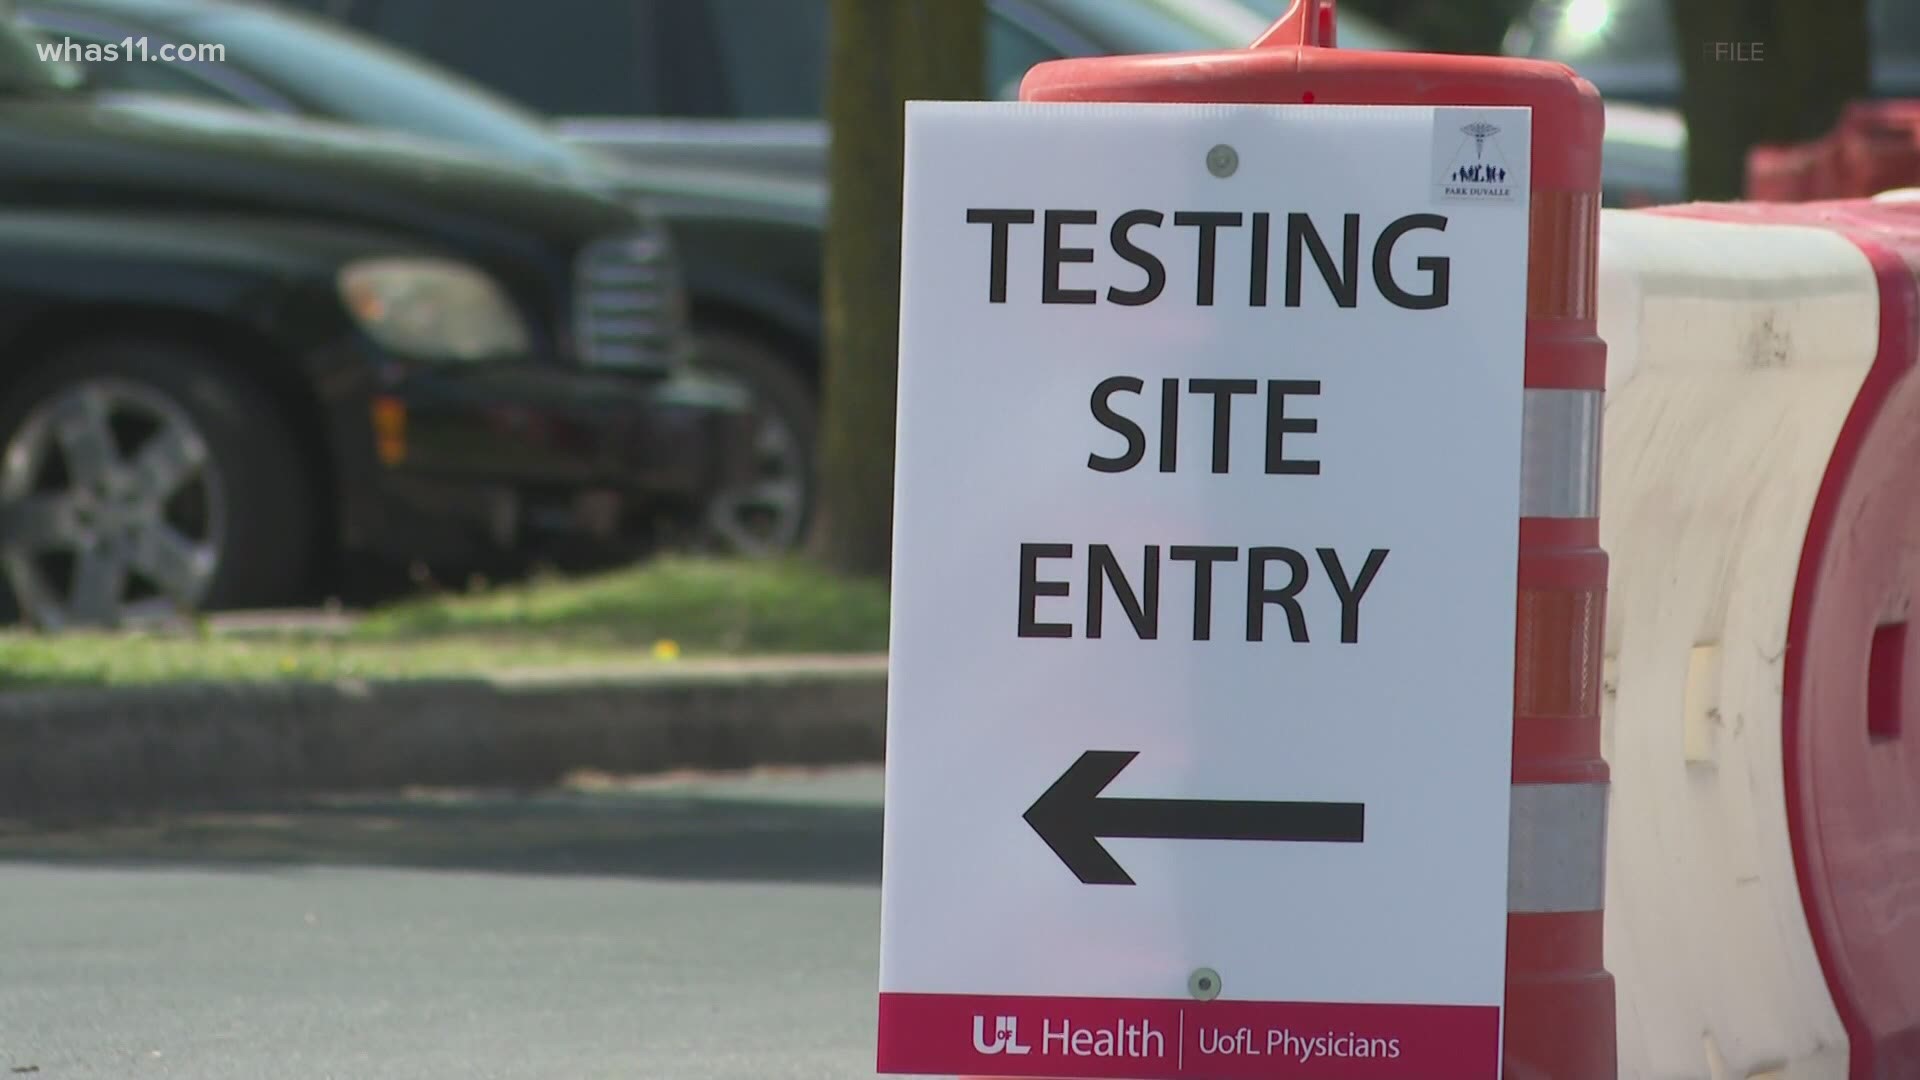 Testing centers across Metro Louisville have expanded their hours and added more slots for people. They're still feeling the strain under this increased demand.